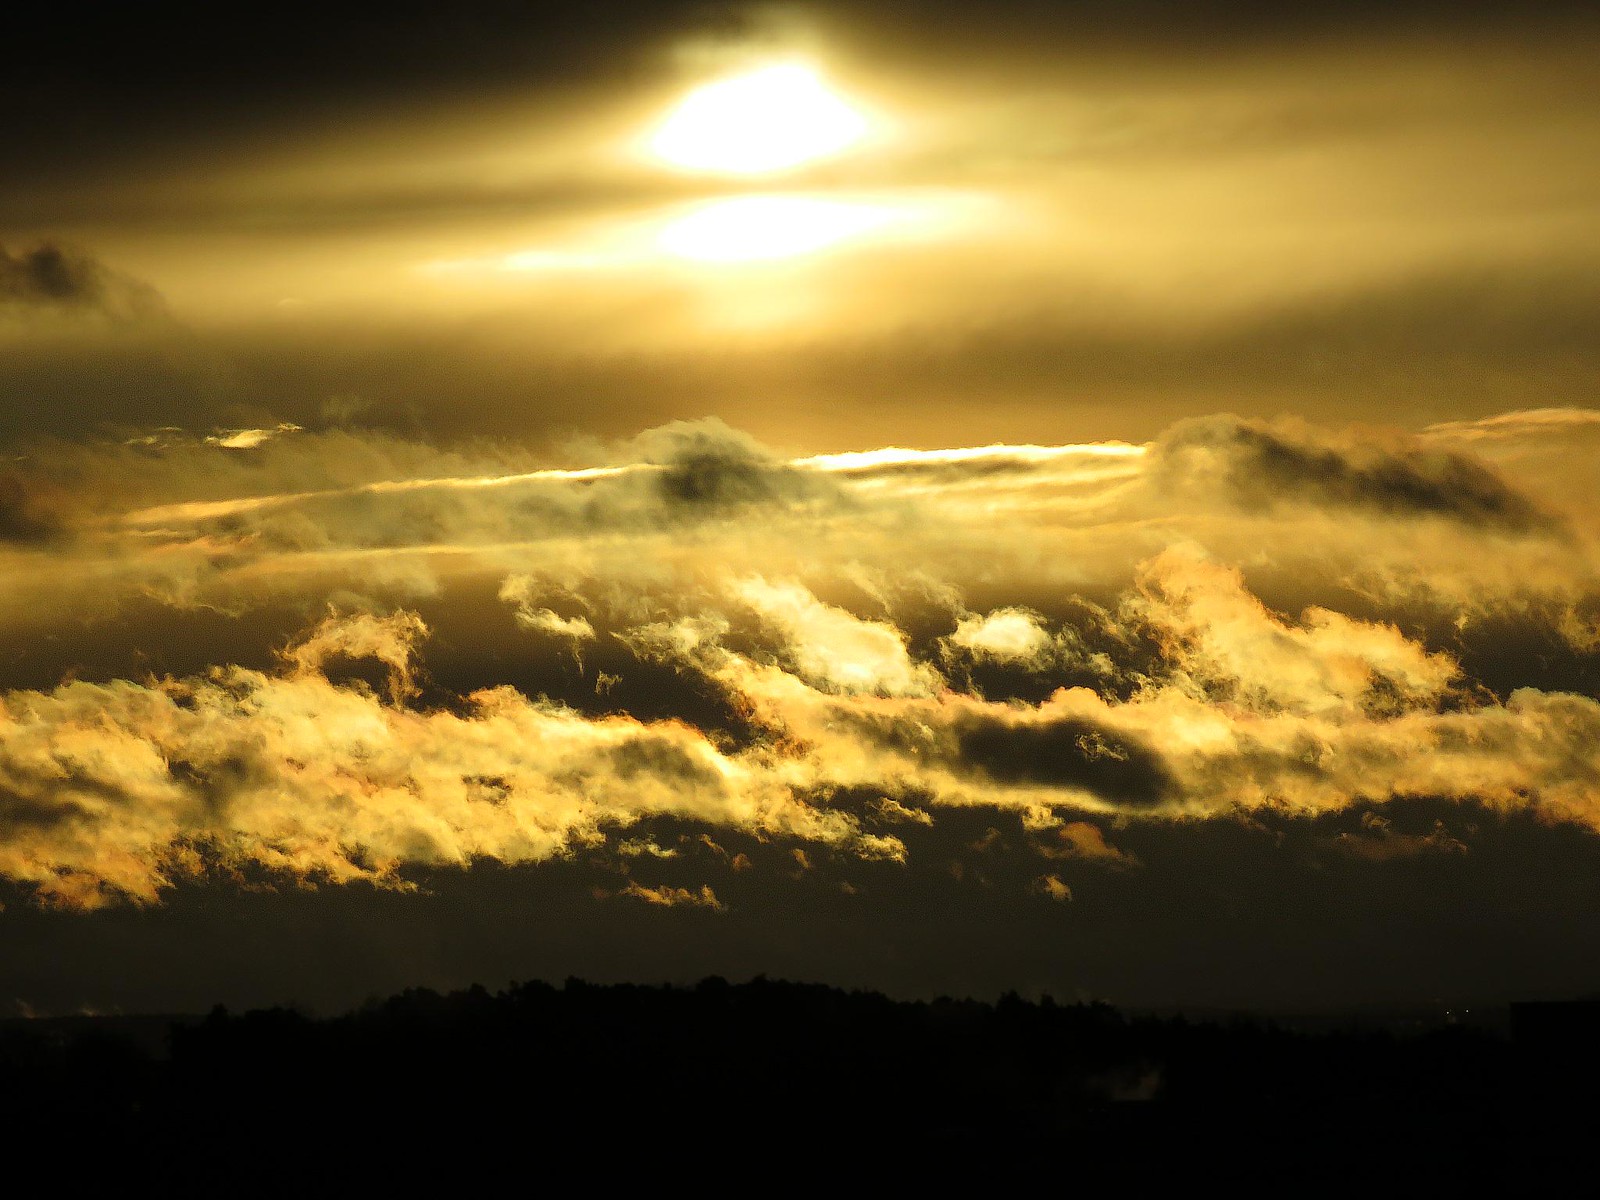 Cloudy Sunset - Canon PowerShot SX60 HS ● Raw photography - aka 350 mm ●● High definition image